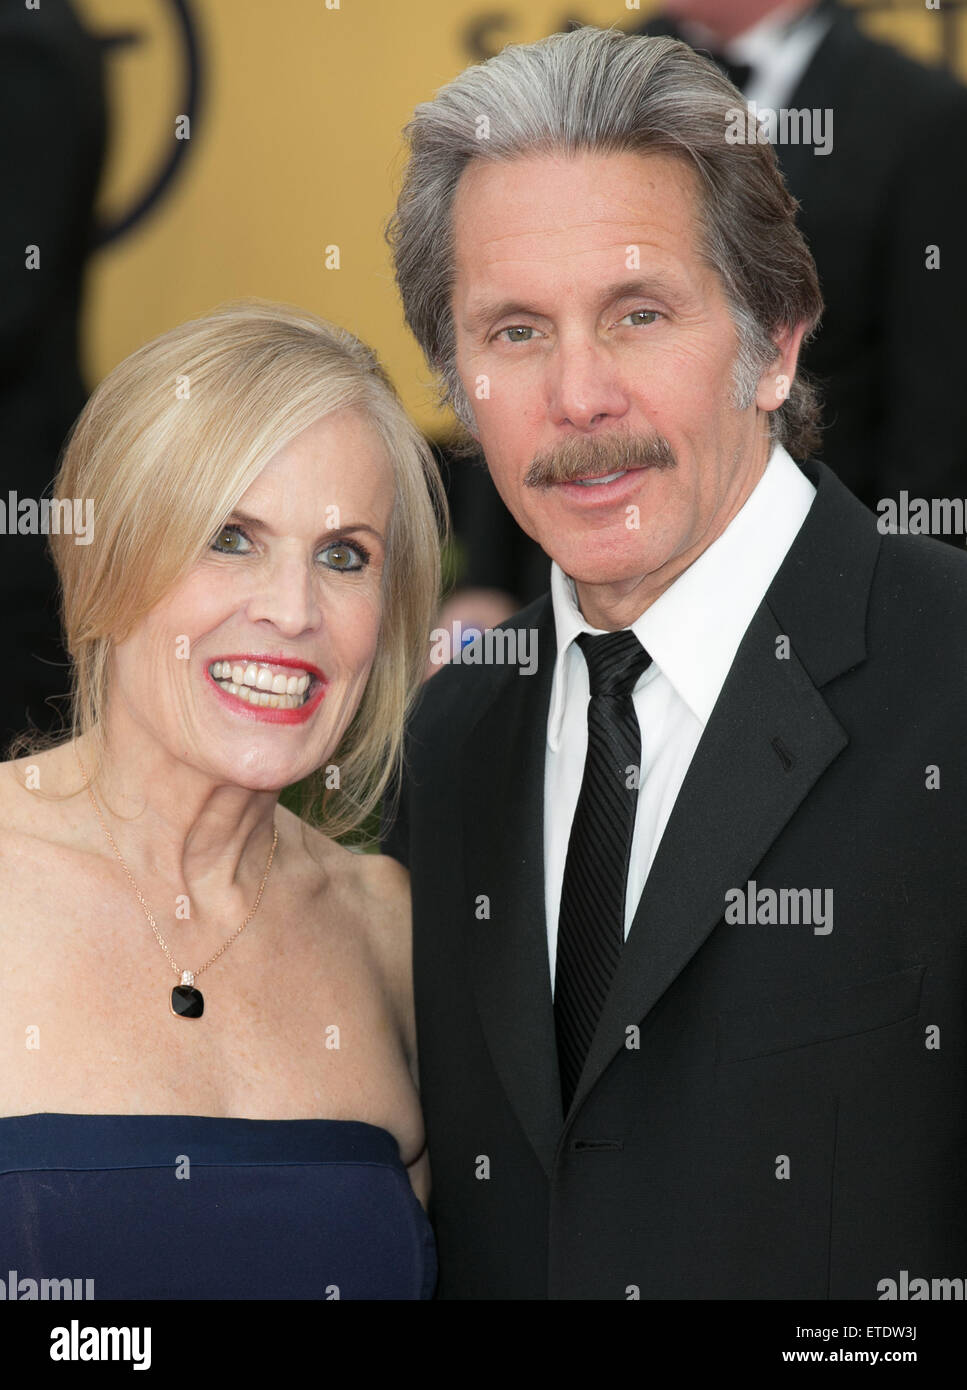 21st Annual SAG (Screen Actors Guild) Awards at Los Angeles Shrine Exposition Center - Arrivals  Featuring: Teddi Siddall, Gary Cole Where: Los Angeles, California, United States When: 25 Jan 2015 Credit: Brian To/WENN.com Stock Photo